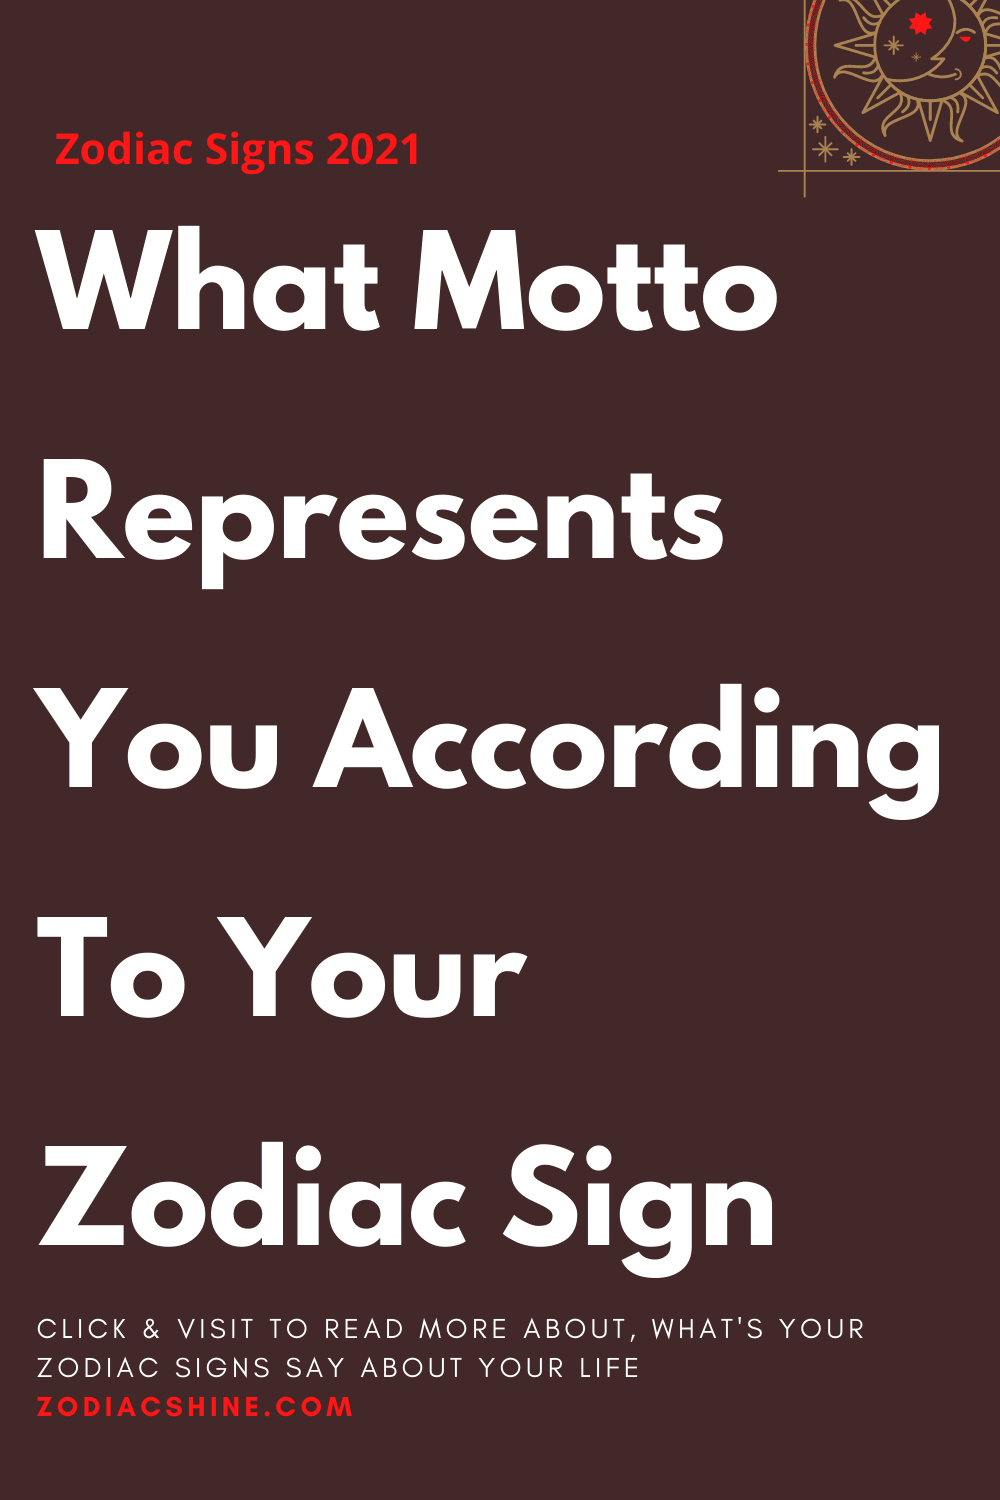 What Motto Represents You According To Your Zodiac Sign